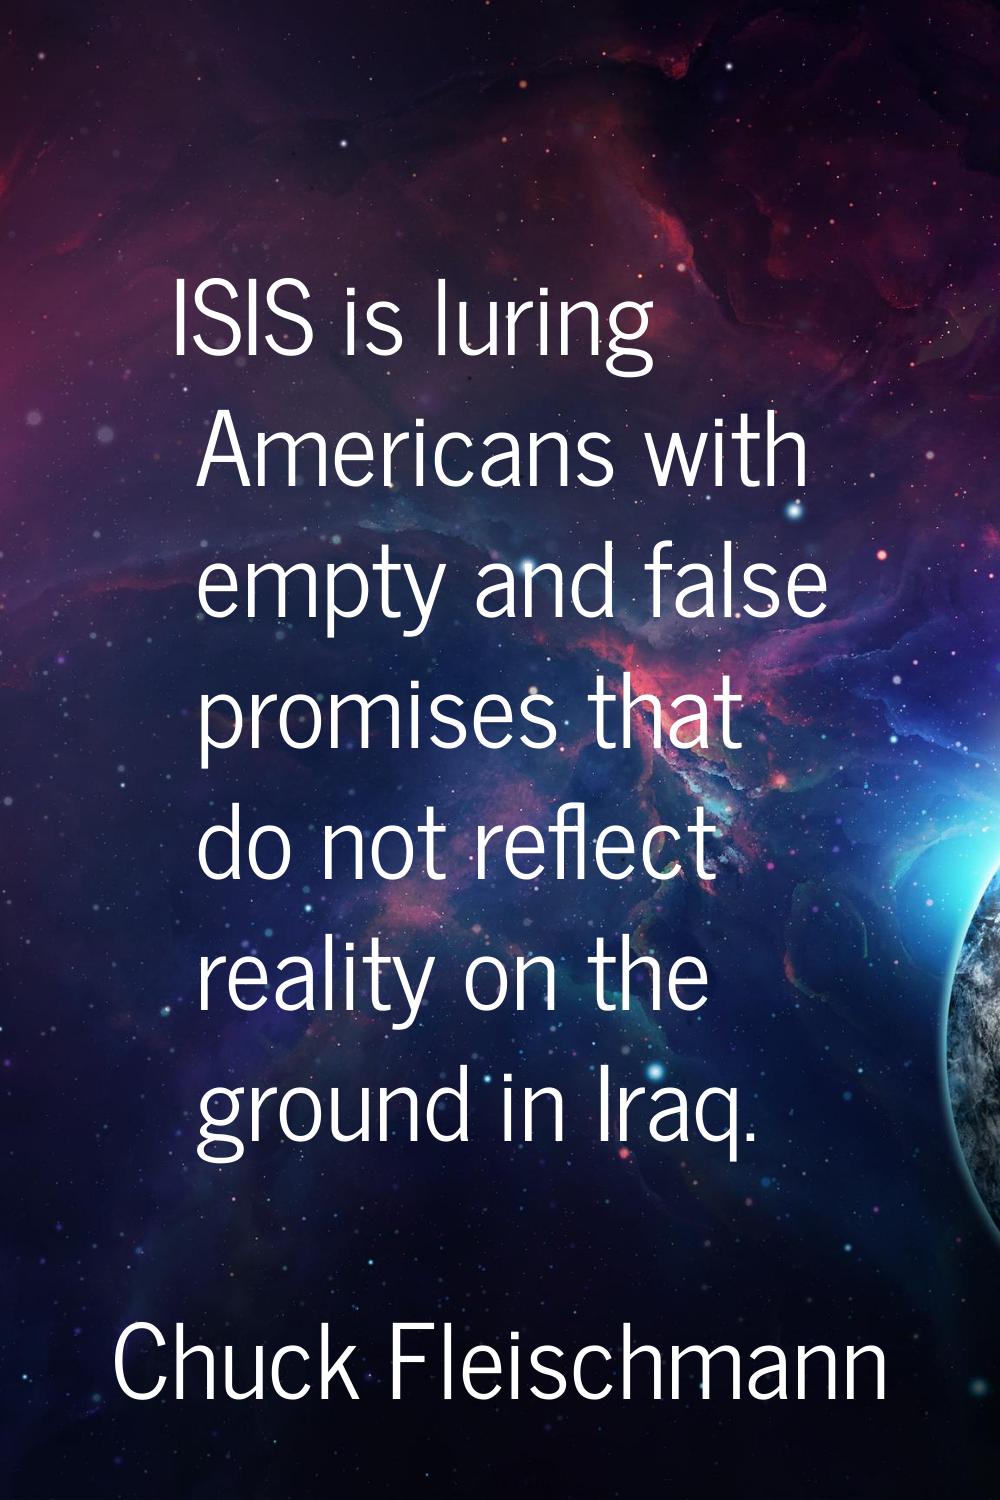 ISIS is luring Americans with empty and false promises that do not reflect reality on the ground in